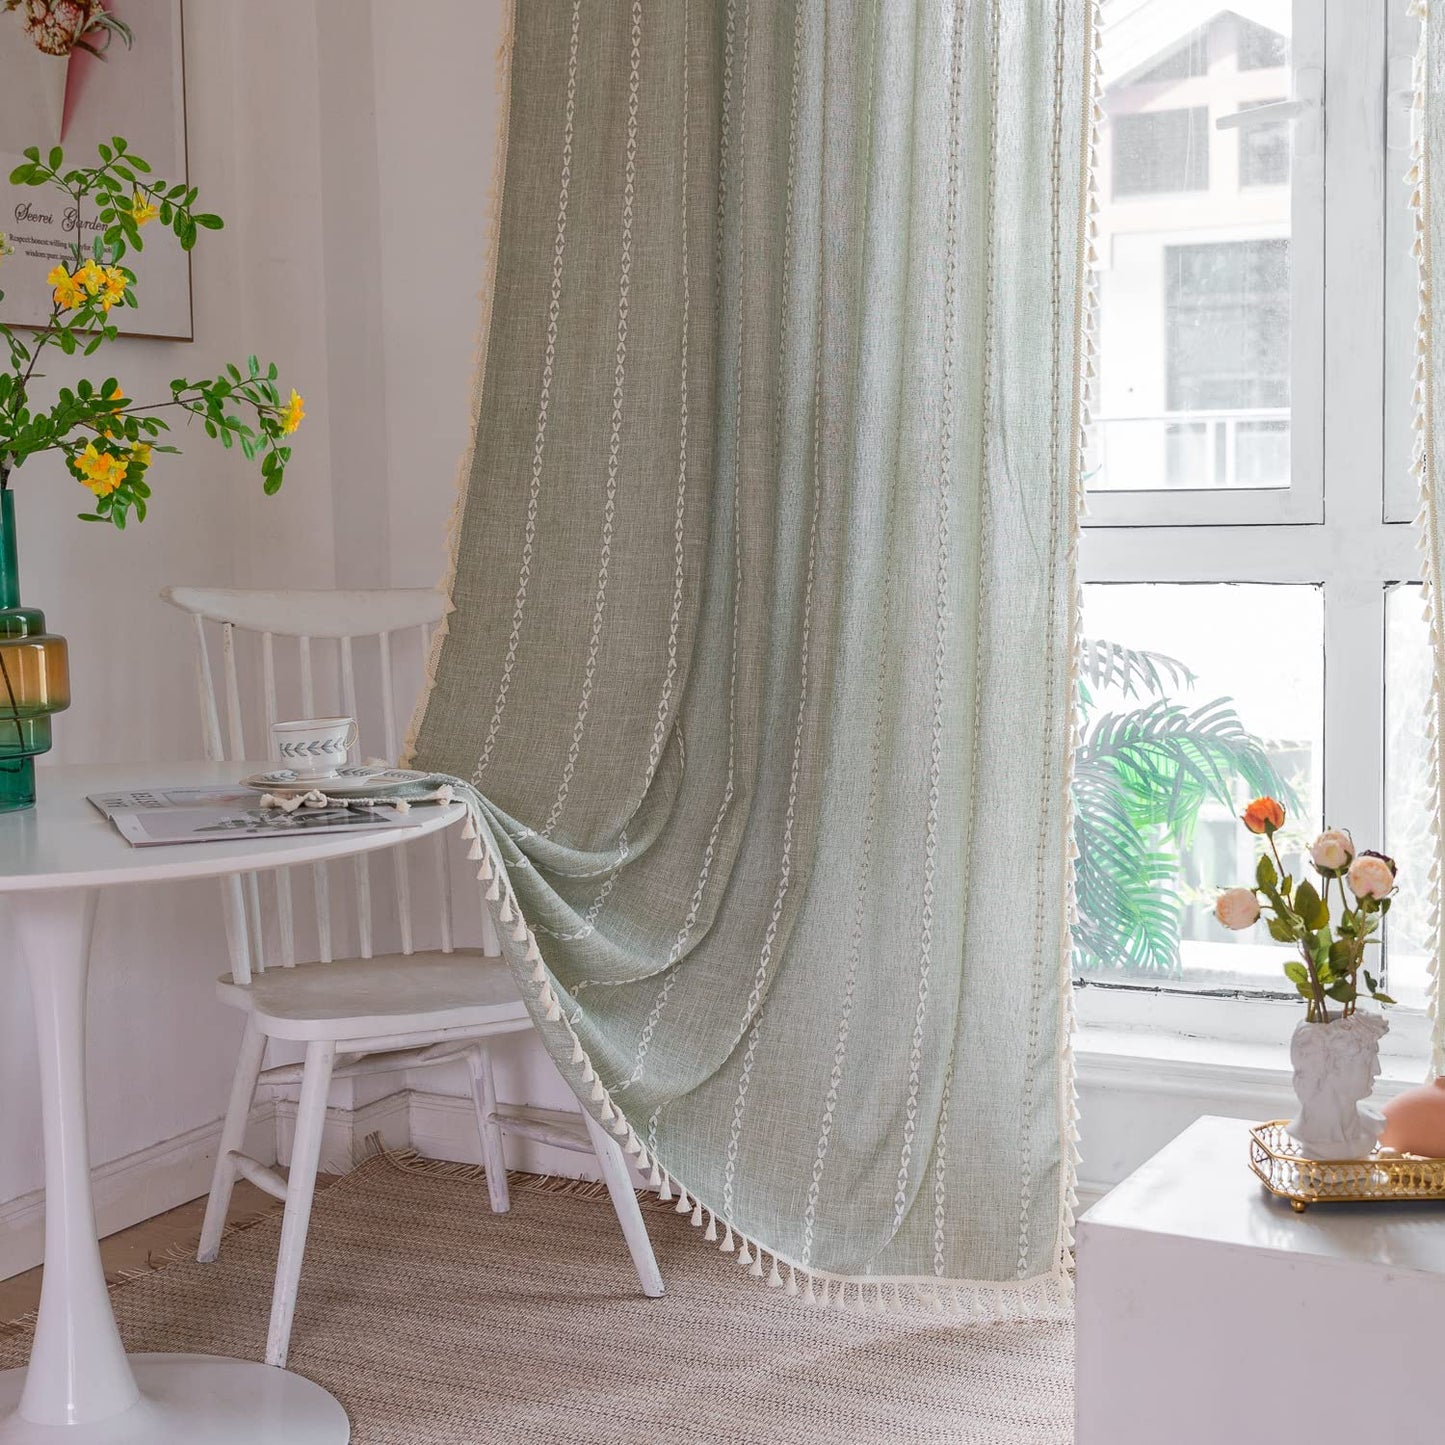 Linen Curtains 84 Inches Long Embroidery Striped Farmhouse Curtains for Living Room Tassel Boho Curtains for Bedroom Light Filtering Curtains 2 Panels Set Rod Pocket Drapes (52" W X 84" L,Khaki)  FMJFZZ Sage Green 84 Inch 